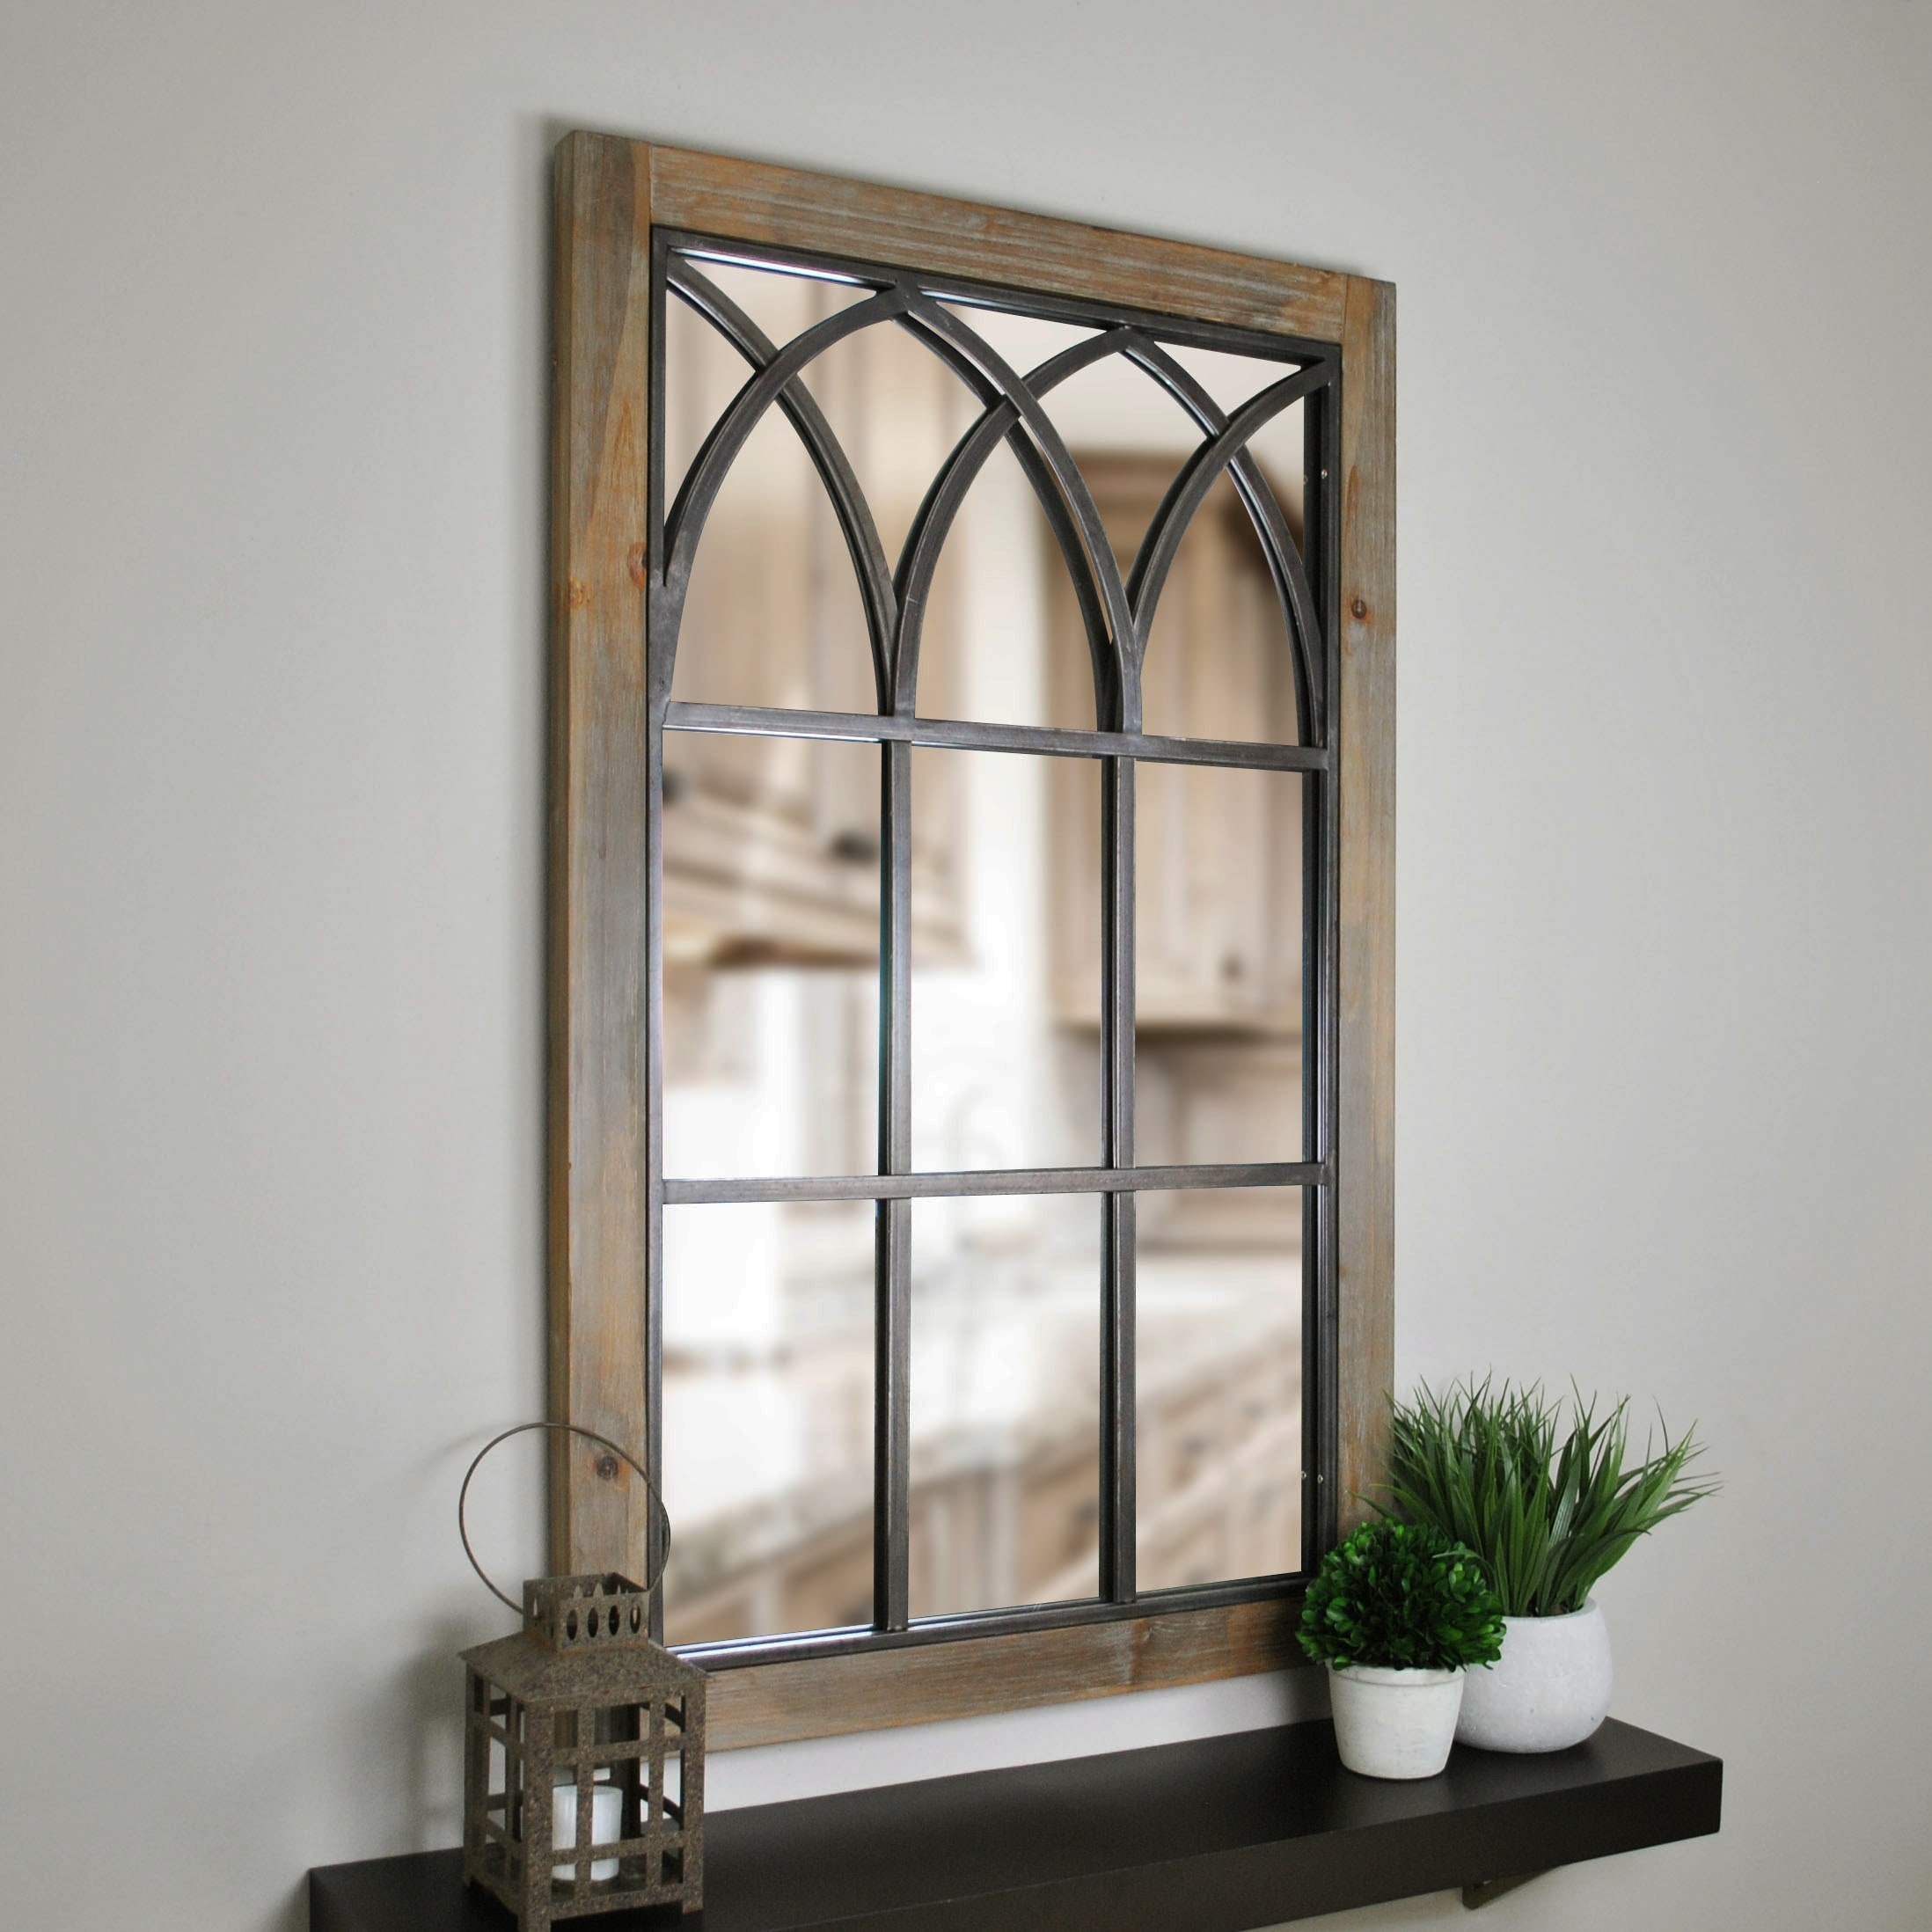 Grandview Arched Farmhouse Window Mirror Wood 24 X 2 X 37 5 In American Designed Overstock 22804718